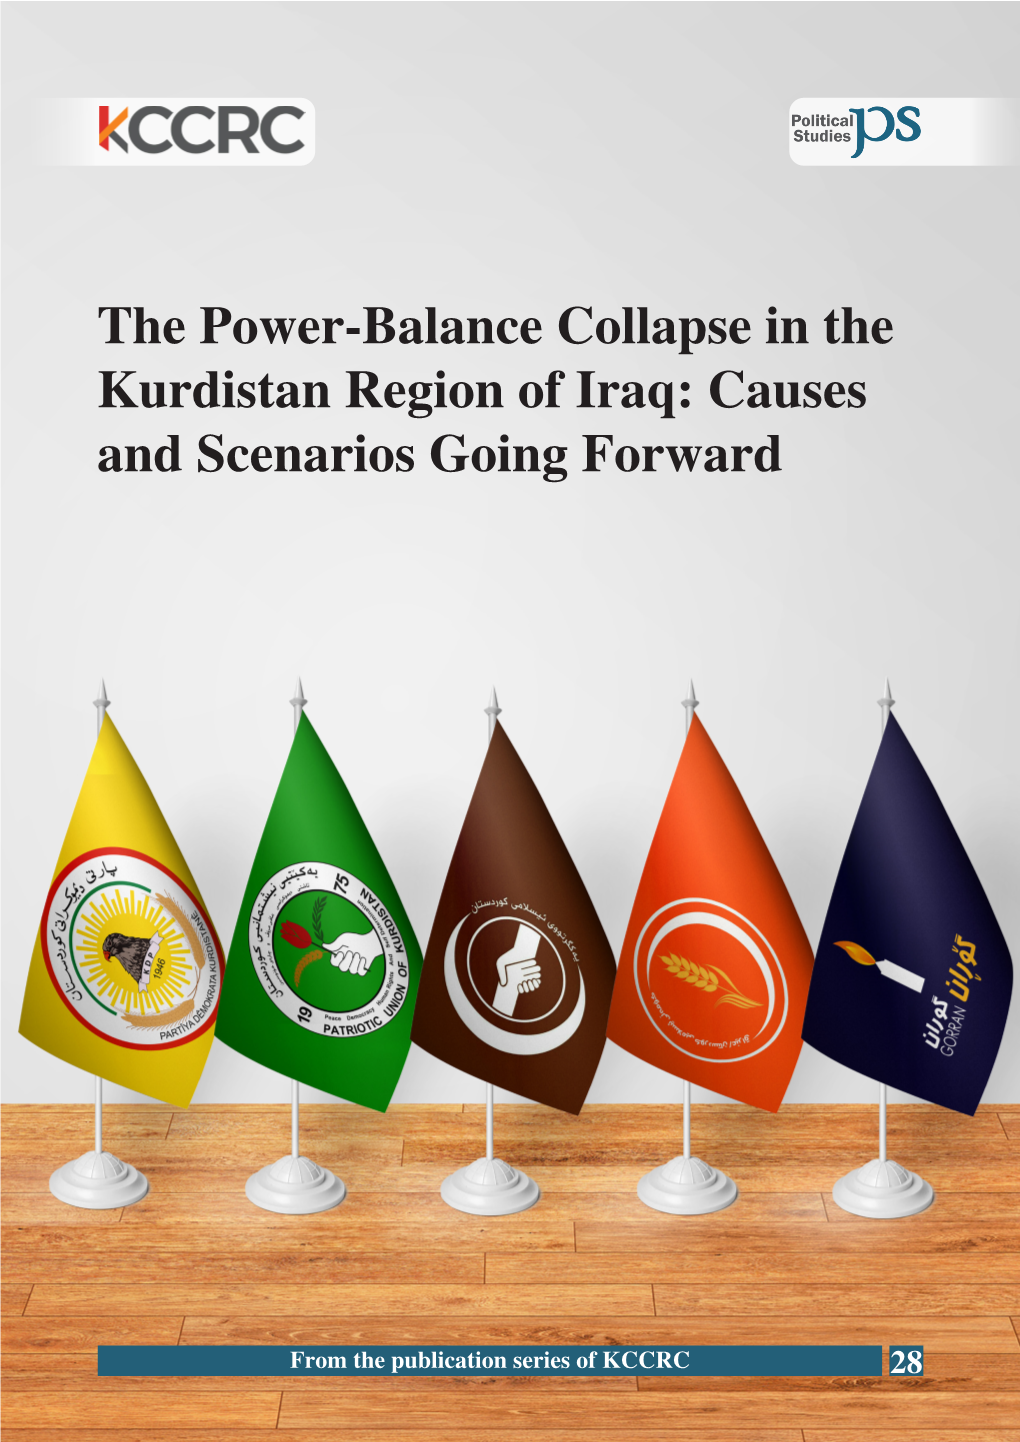 The Power-Balance Collapse in the Kurdistan Region of Iraq: Causes and Scenarios Going Forward